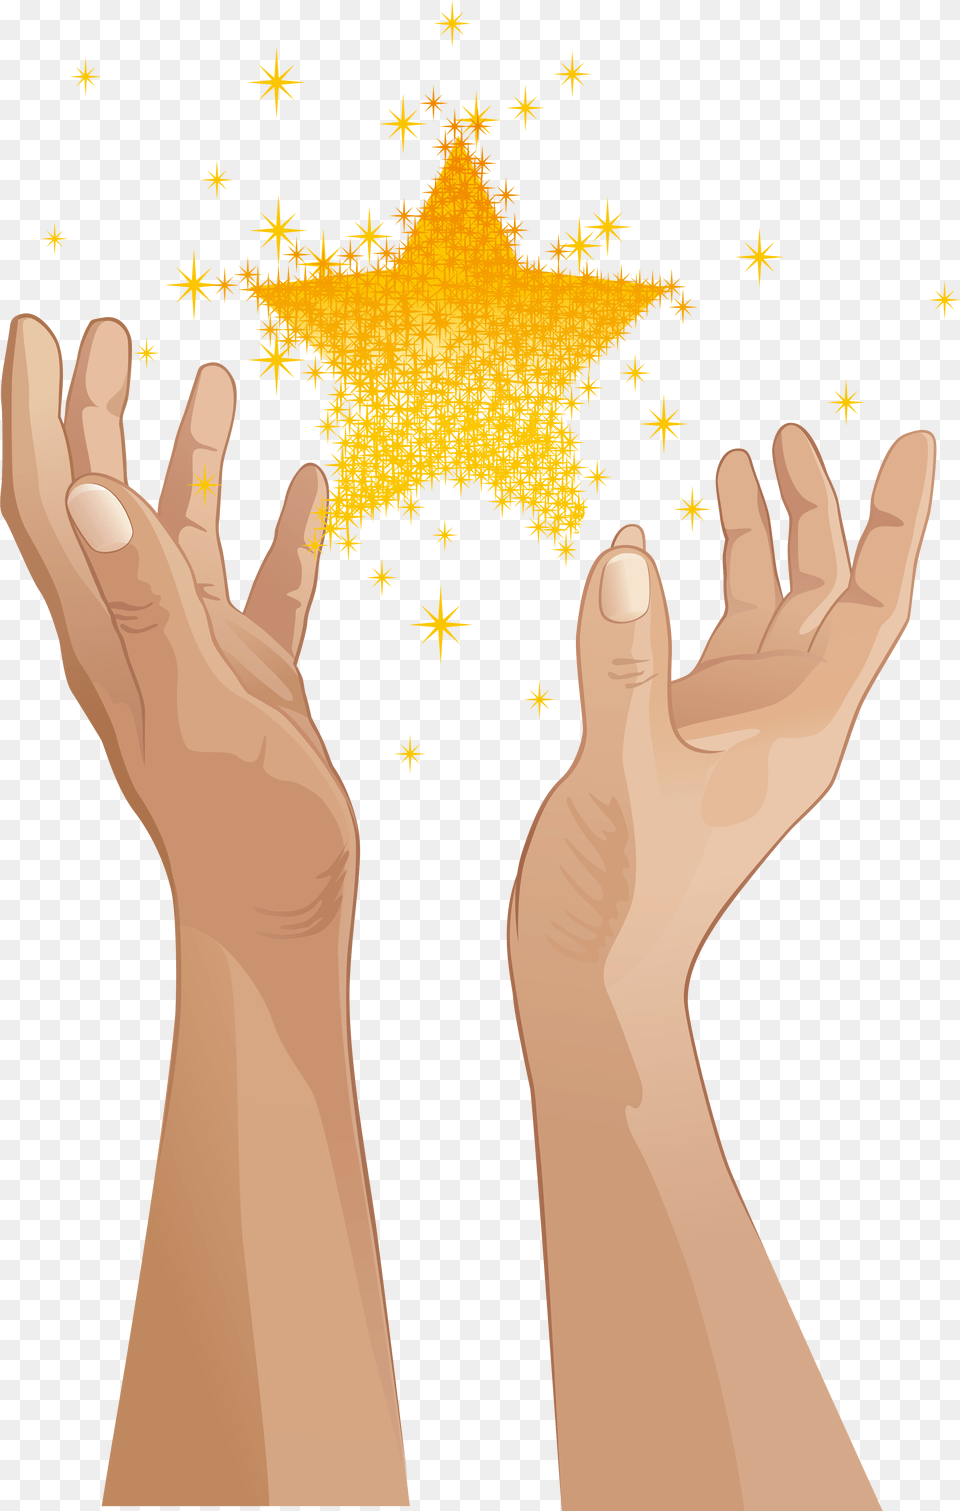 Reaching Hand Star In Hand Vector Full Size Hand Reaching For The Stars, Symbol, Star Symbol, Body Part, Person Png